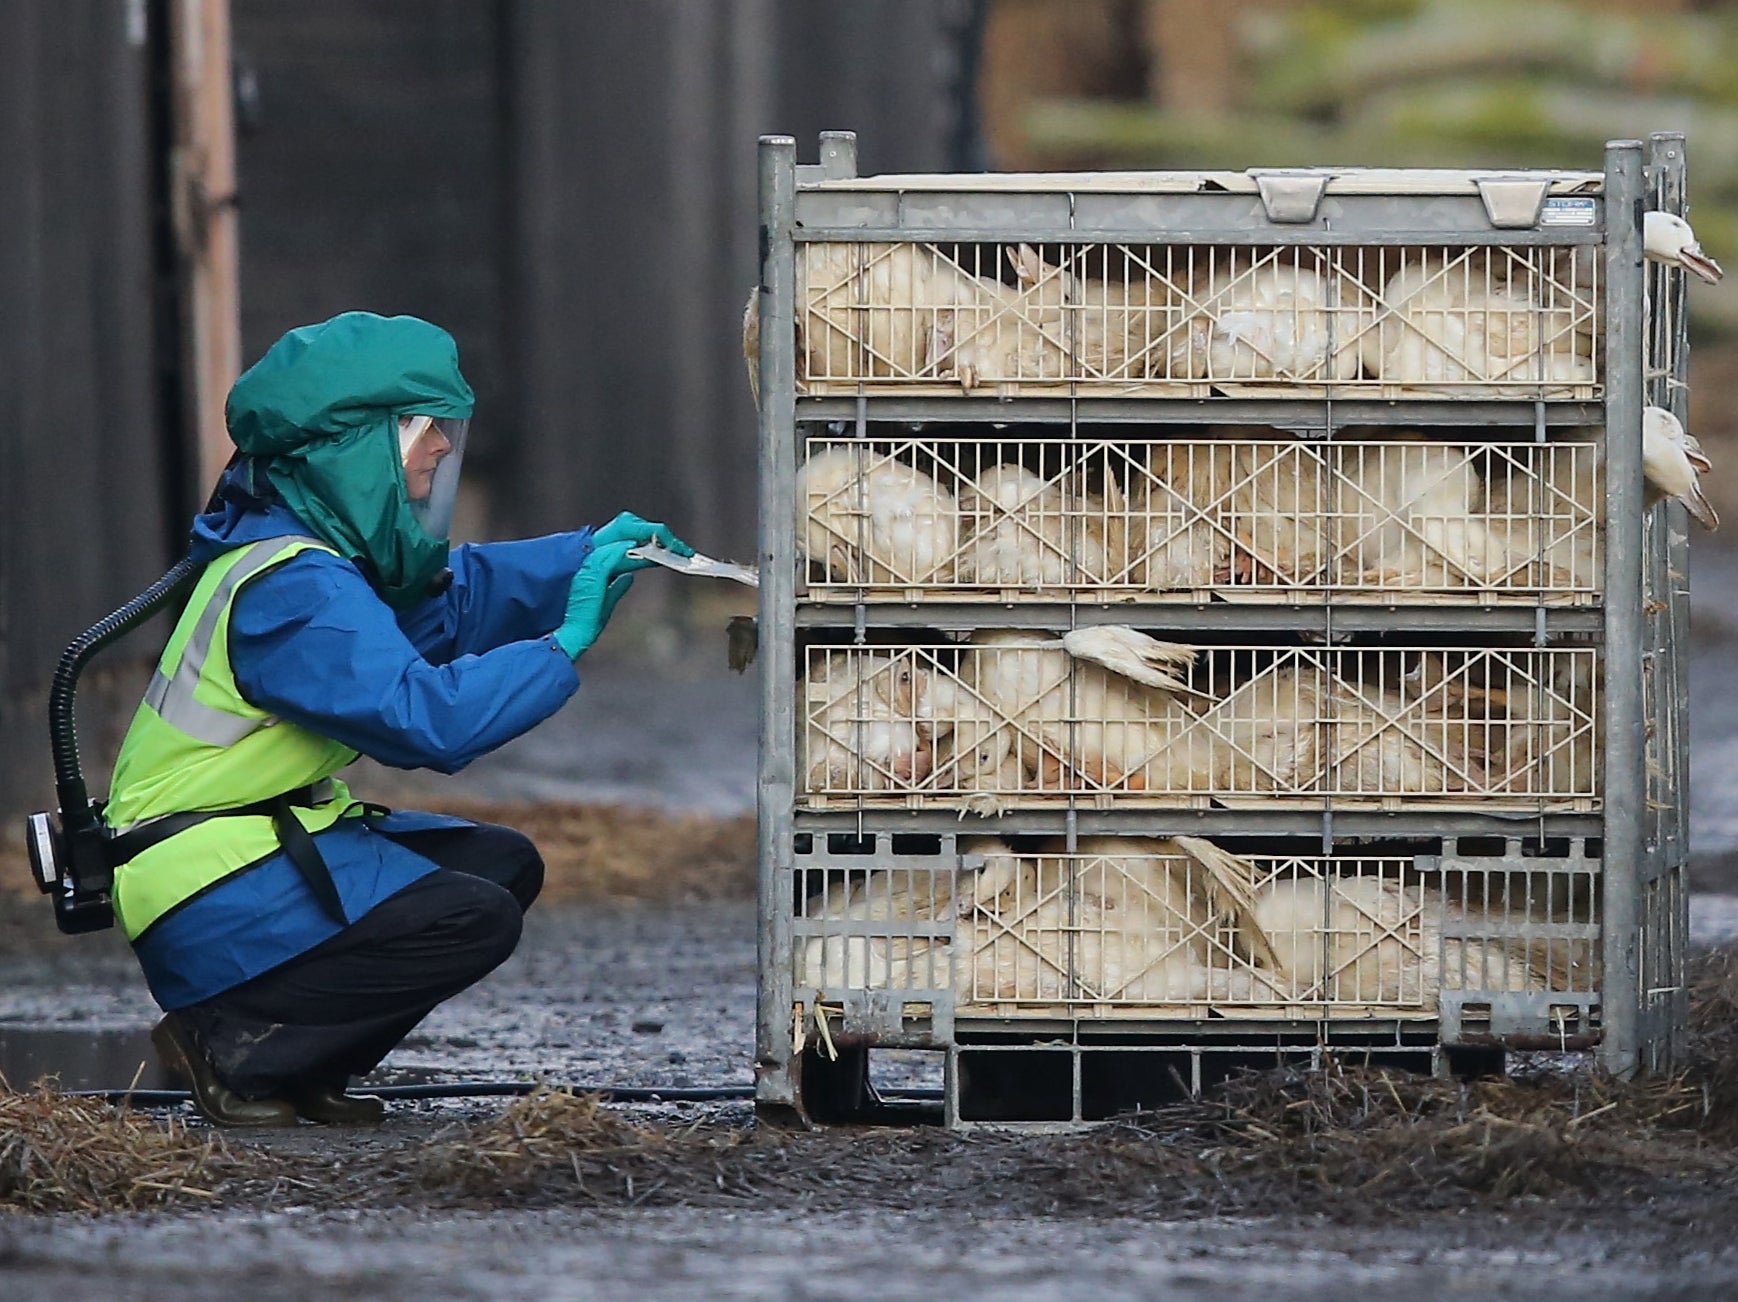 Defra officials dispose of culled ducks at a farm near Nafferton, East Yorkshire, where a strain of bird flu has been confirmed